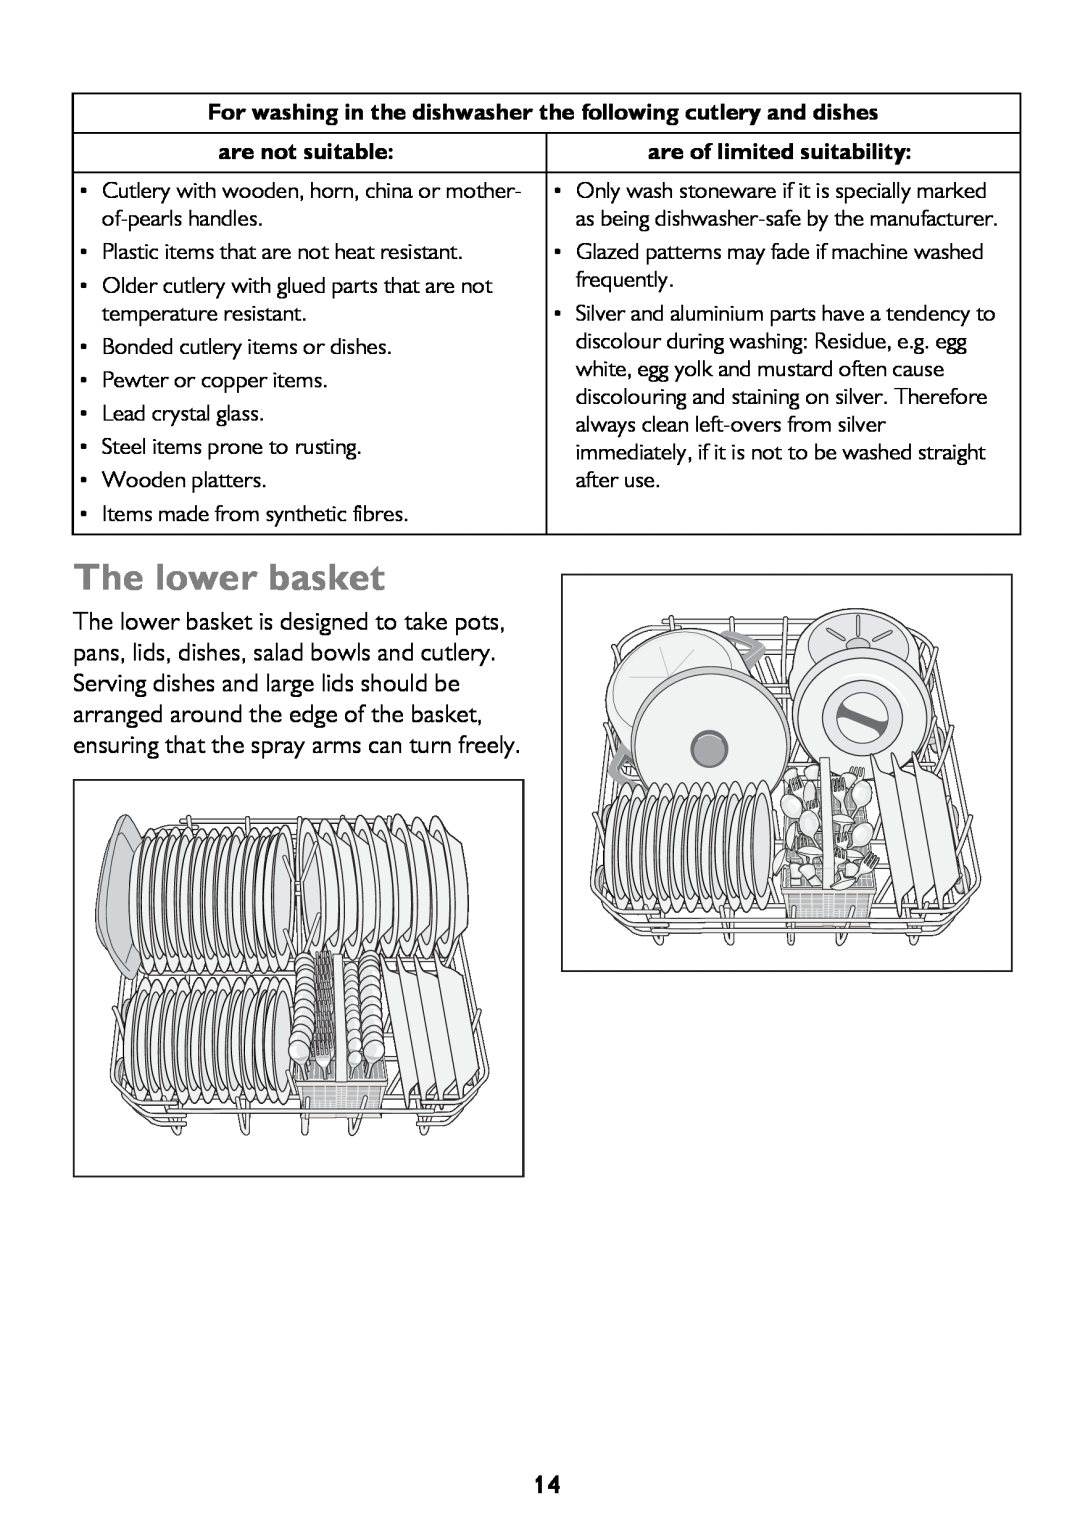 John Lewis JLBIDW 1201 instruction manual The lower basket, are not suitable, are of limited suitability 